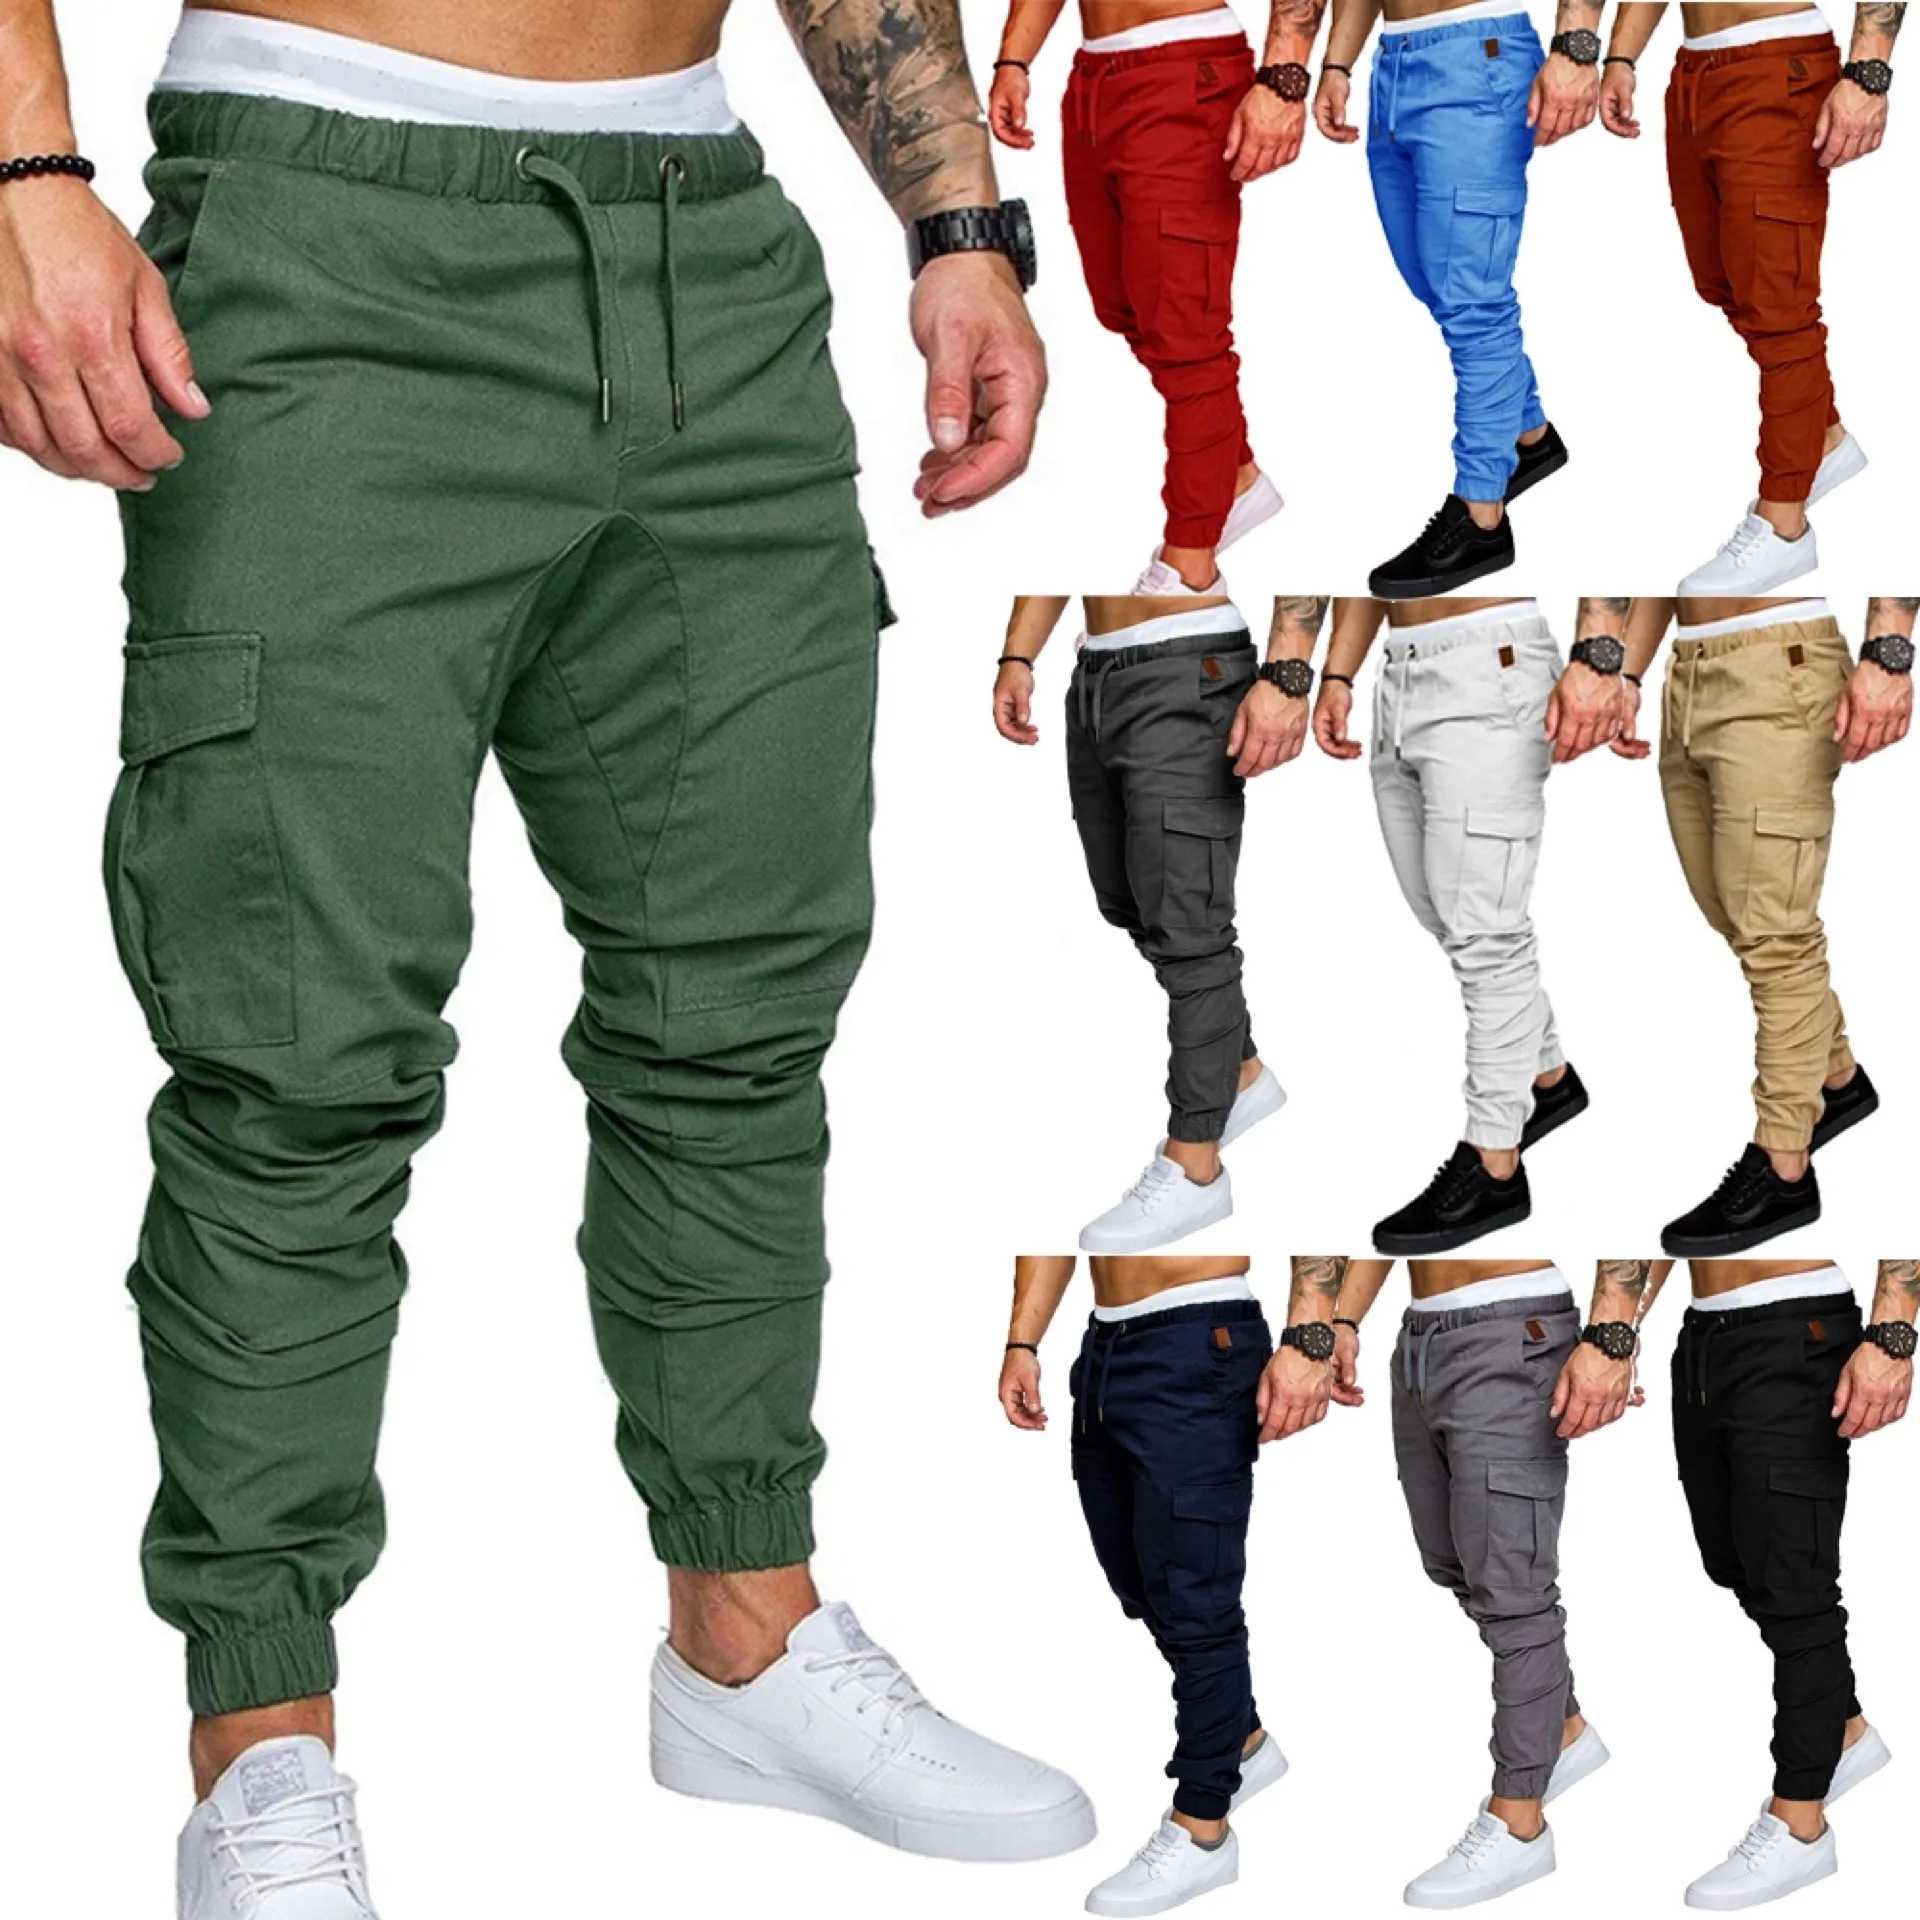 

New Global Men's Casual Tethered Elastic Sports Baggy Pants Trousers Sports Outdoor Jogging Equipment 10 Colors M-XXXXL